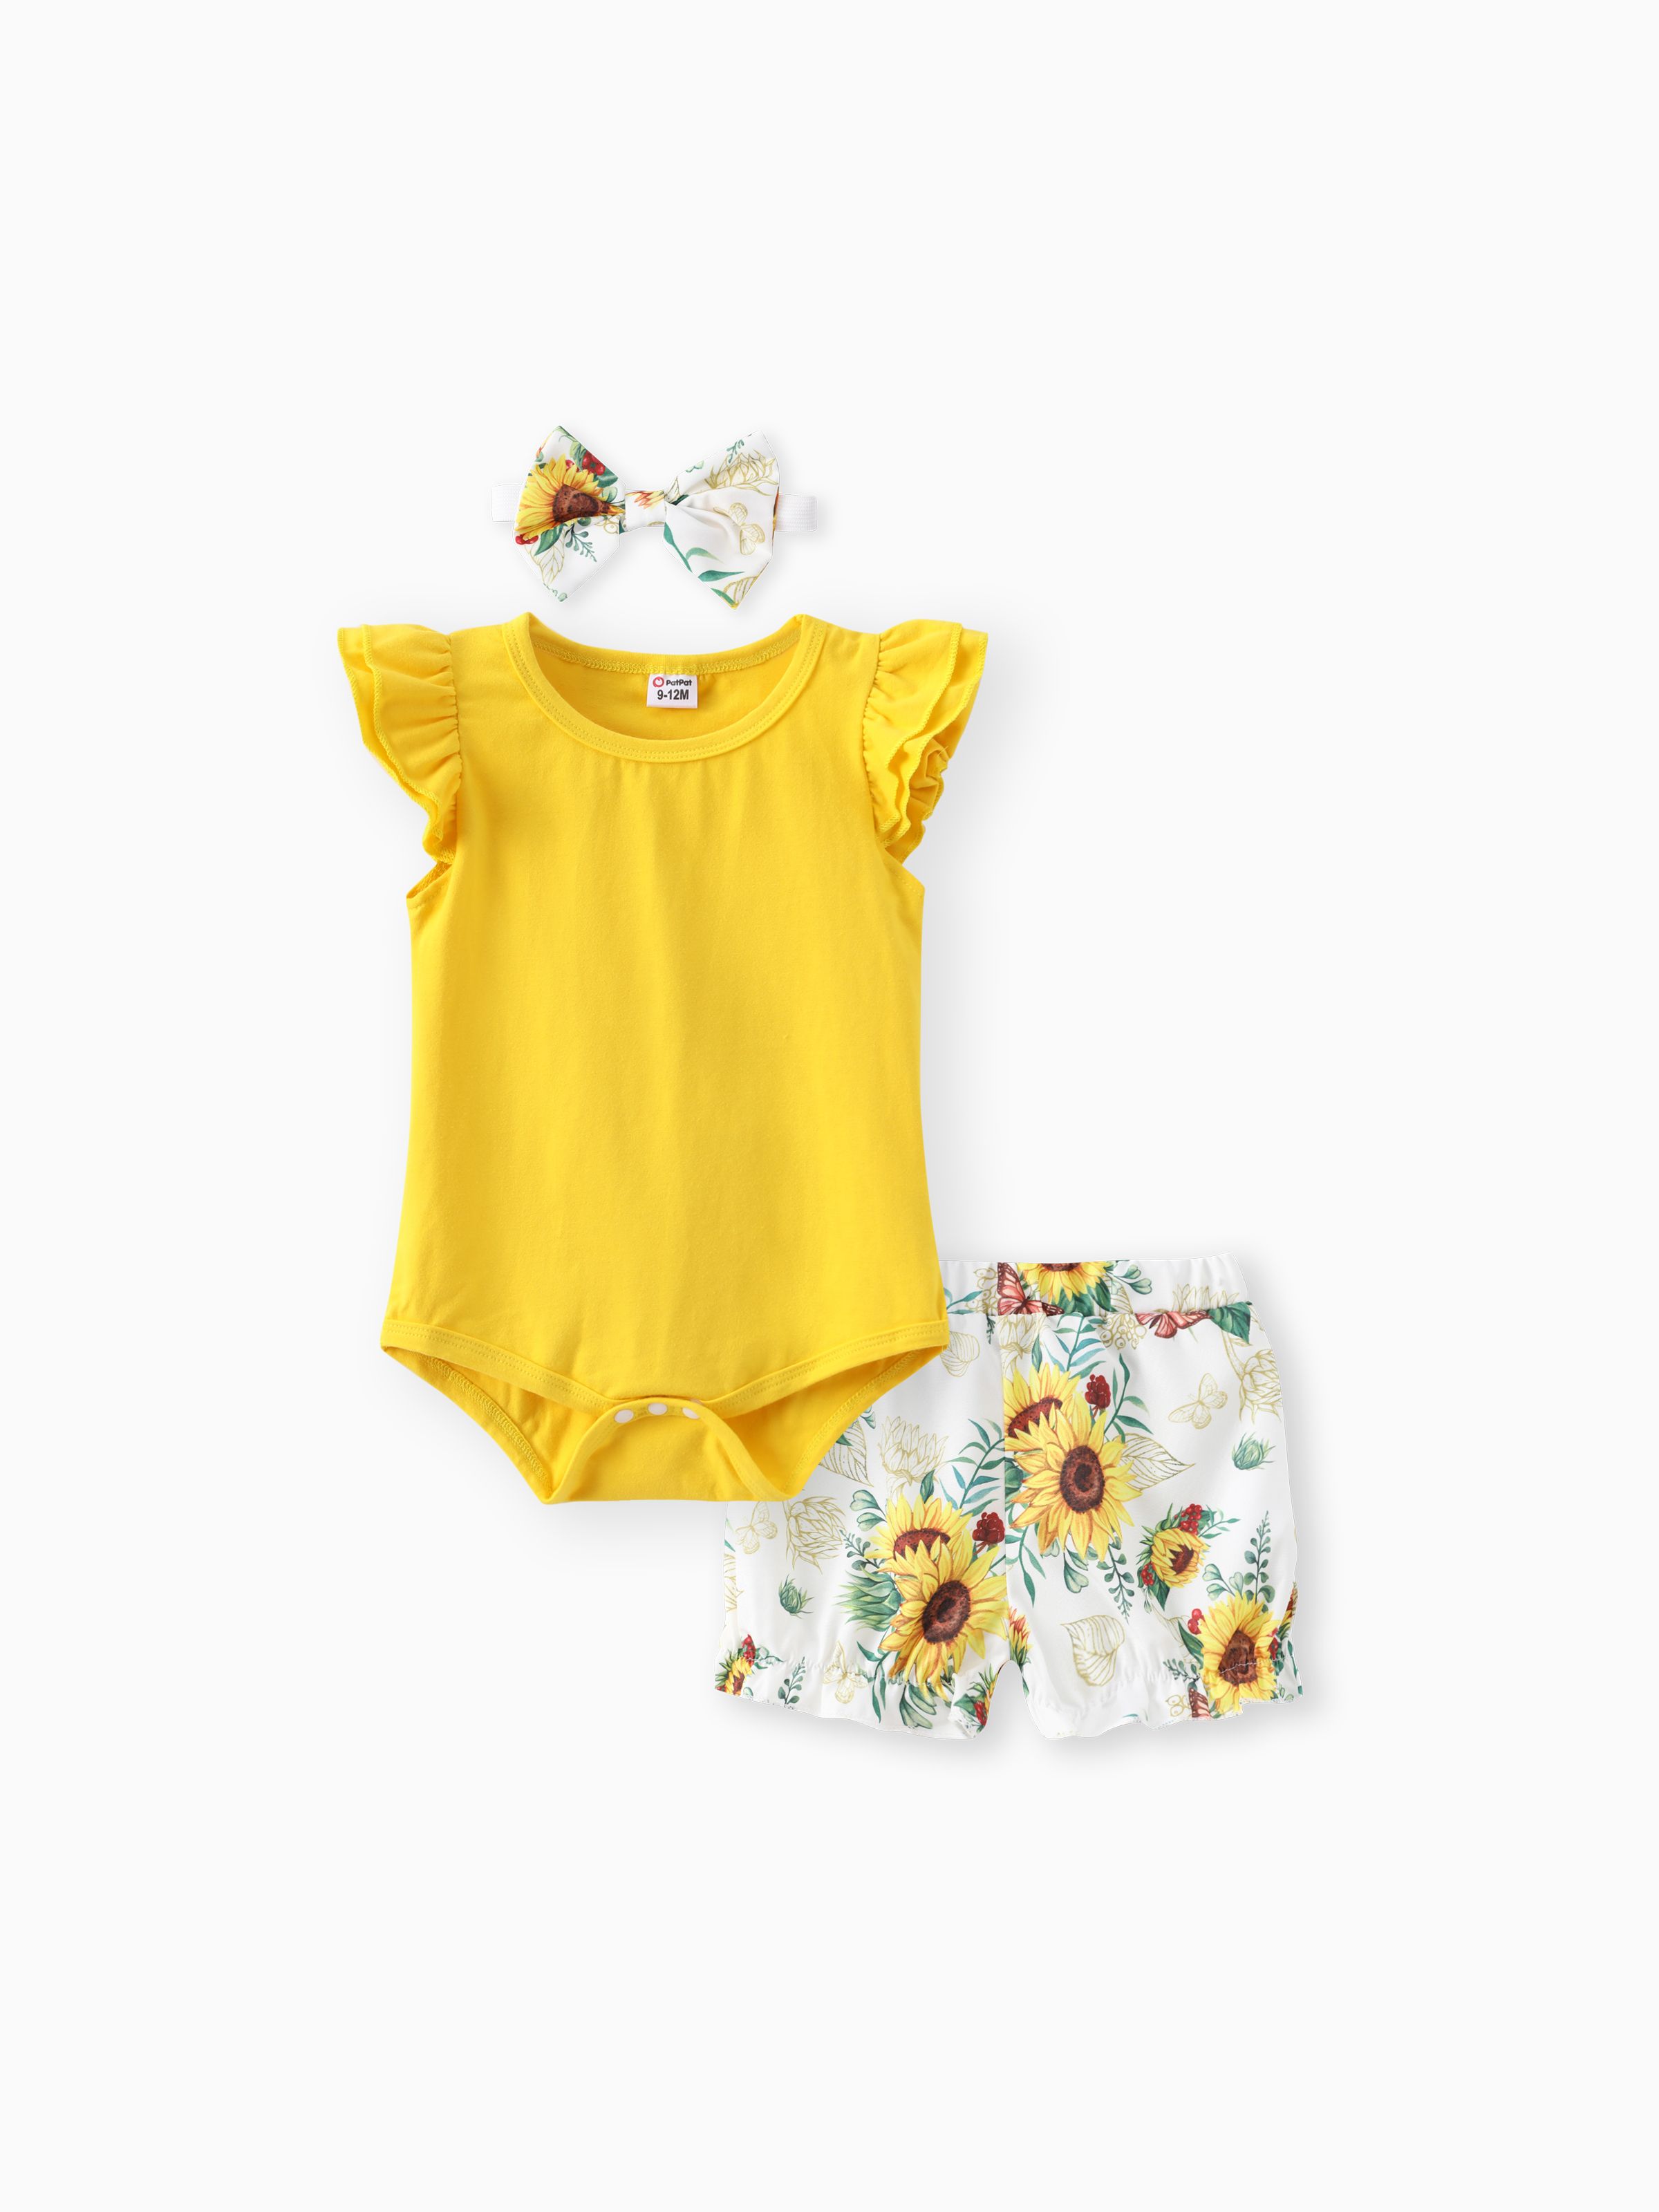 

3pcs Baby Girl 95% Cotton Layered Ruffle Sleeve Romper with Floral Print Bloomers Shorts and Headband Set